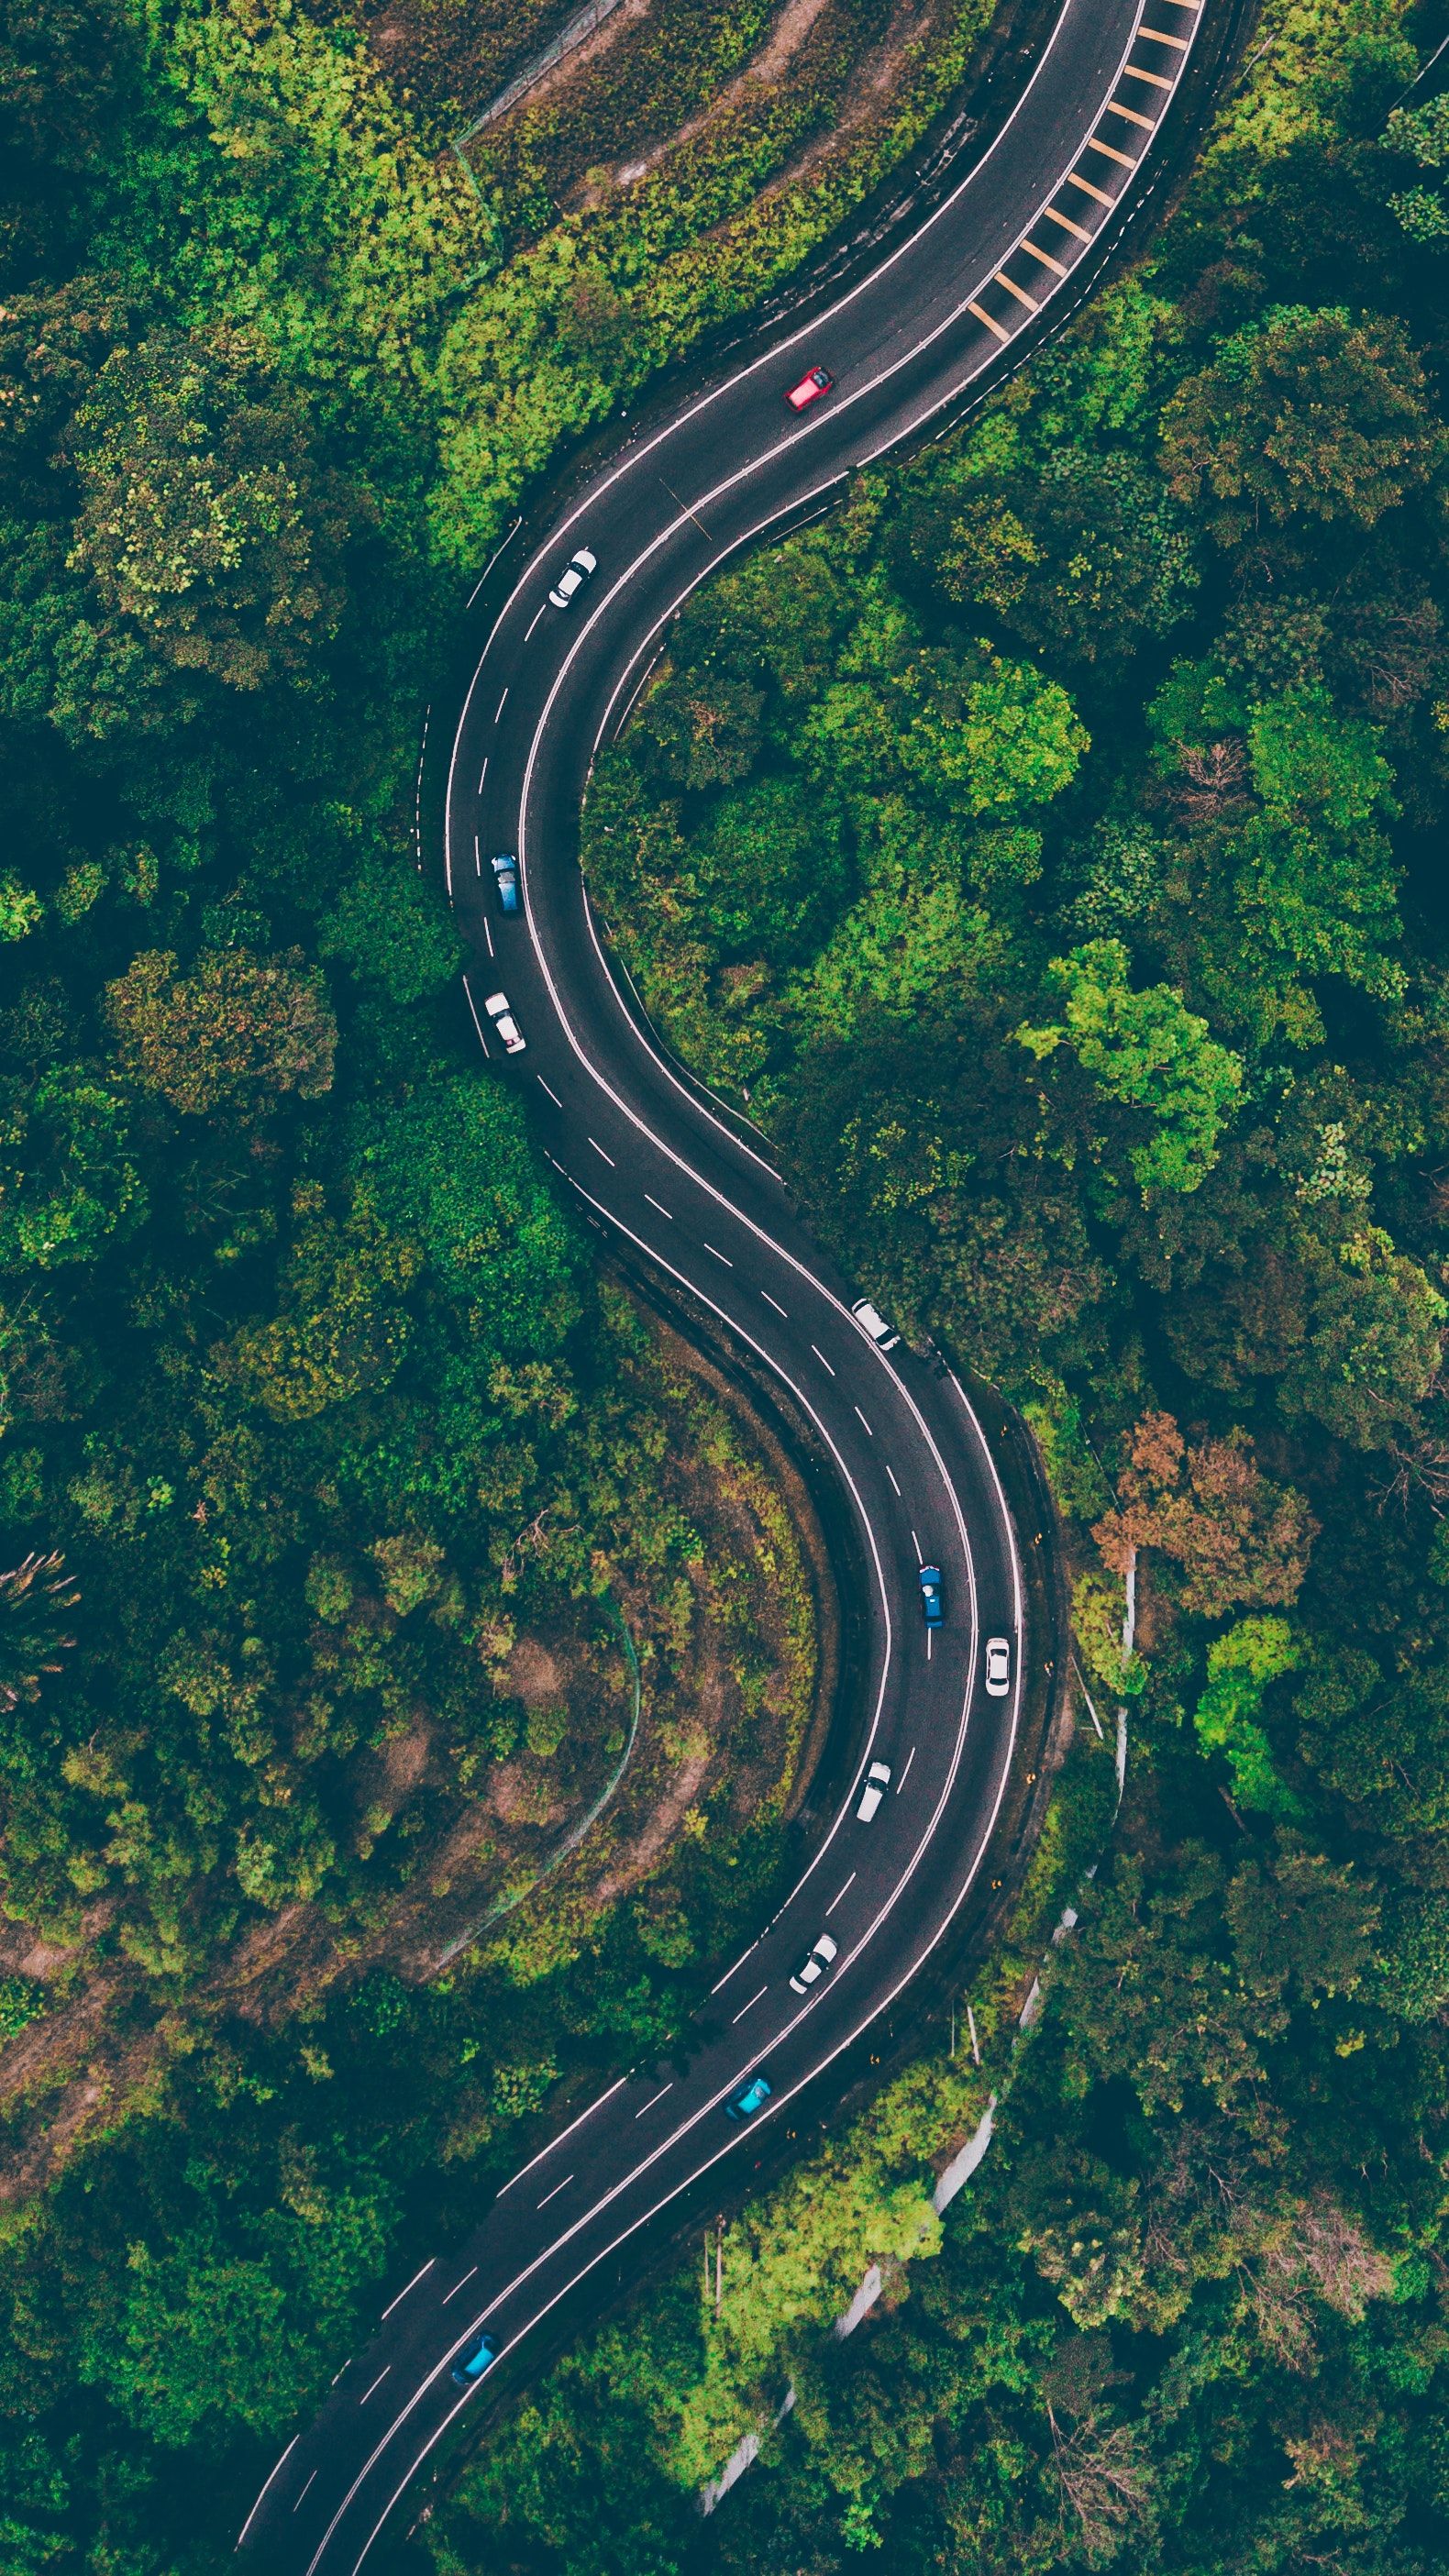 Aerial view of a road in the middle of a forest - Road